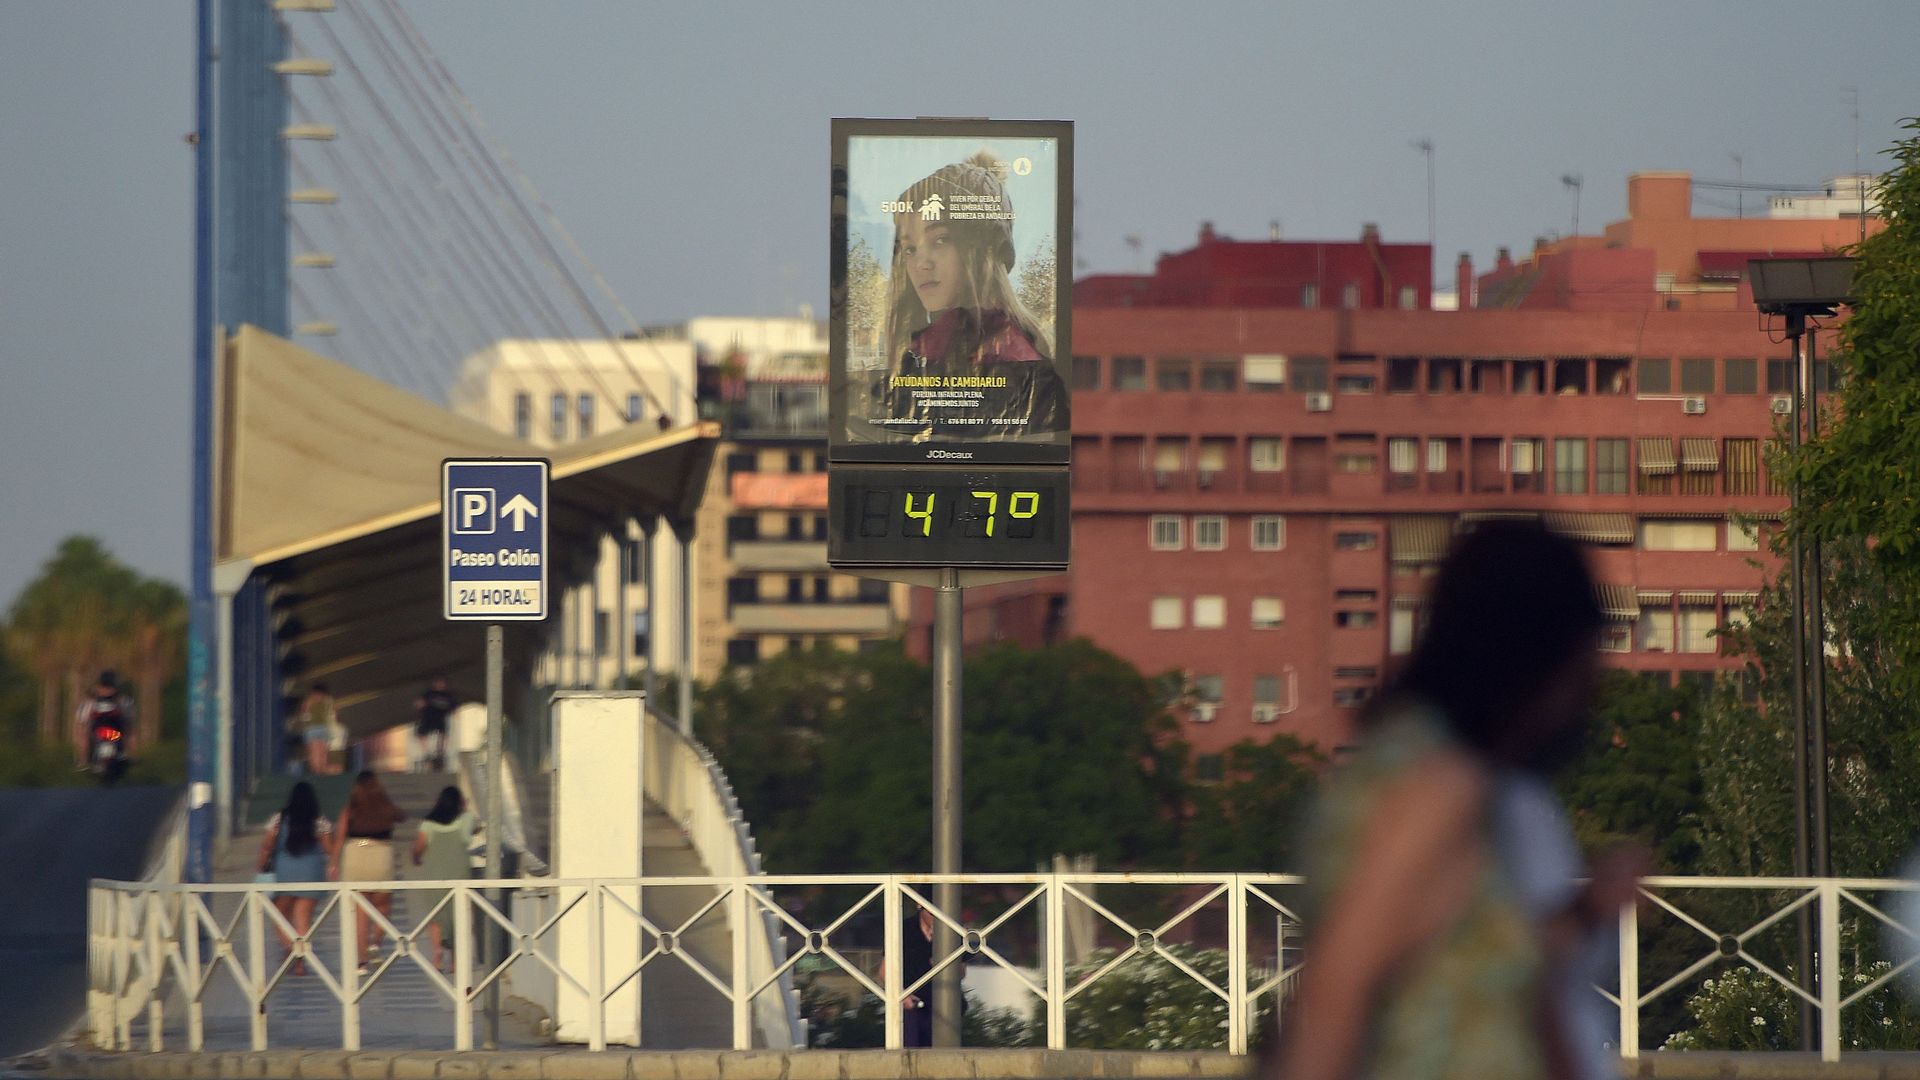 A sign in Seville showing 47 degrees C. 